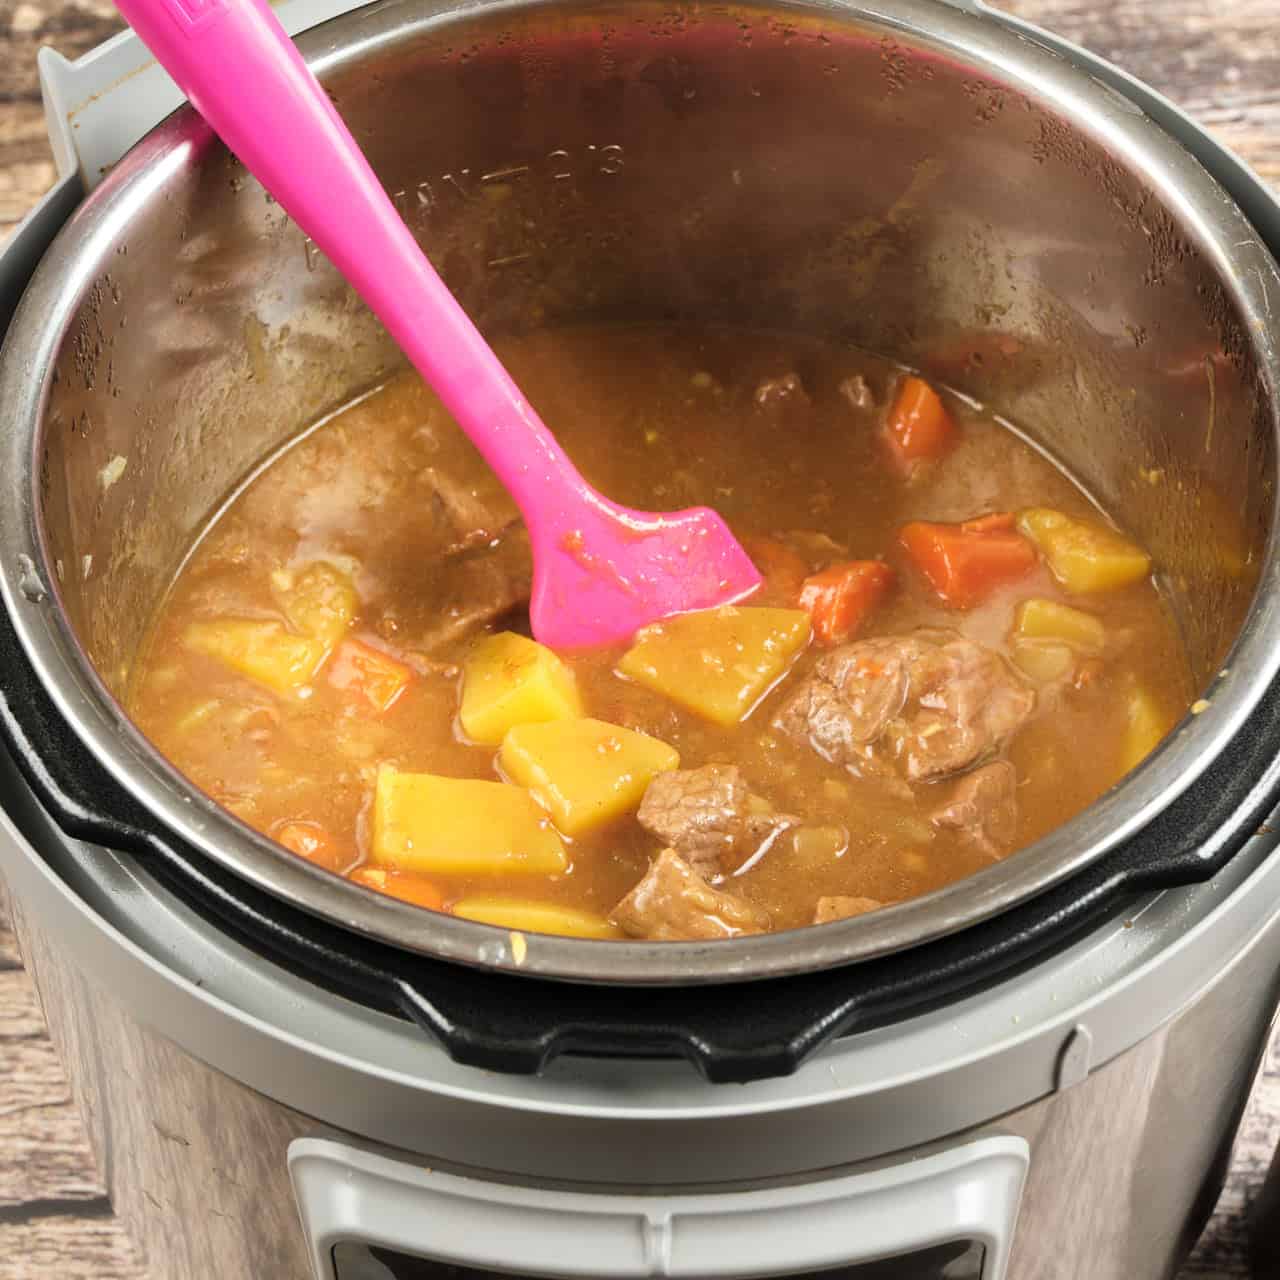 Japanese Curry, cooked in an Instant Pot